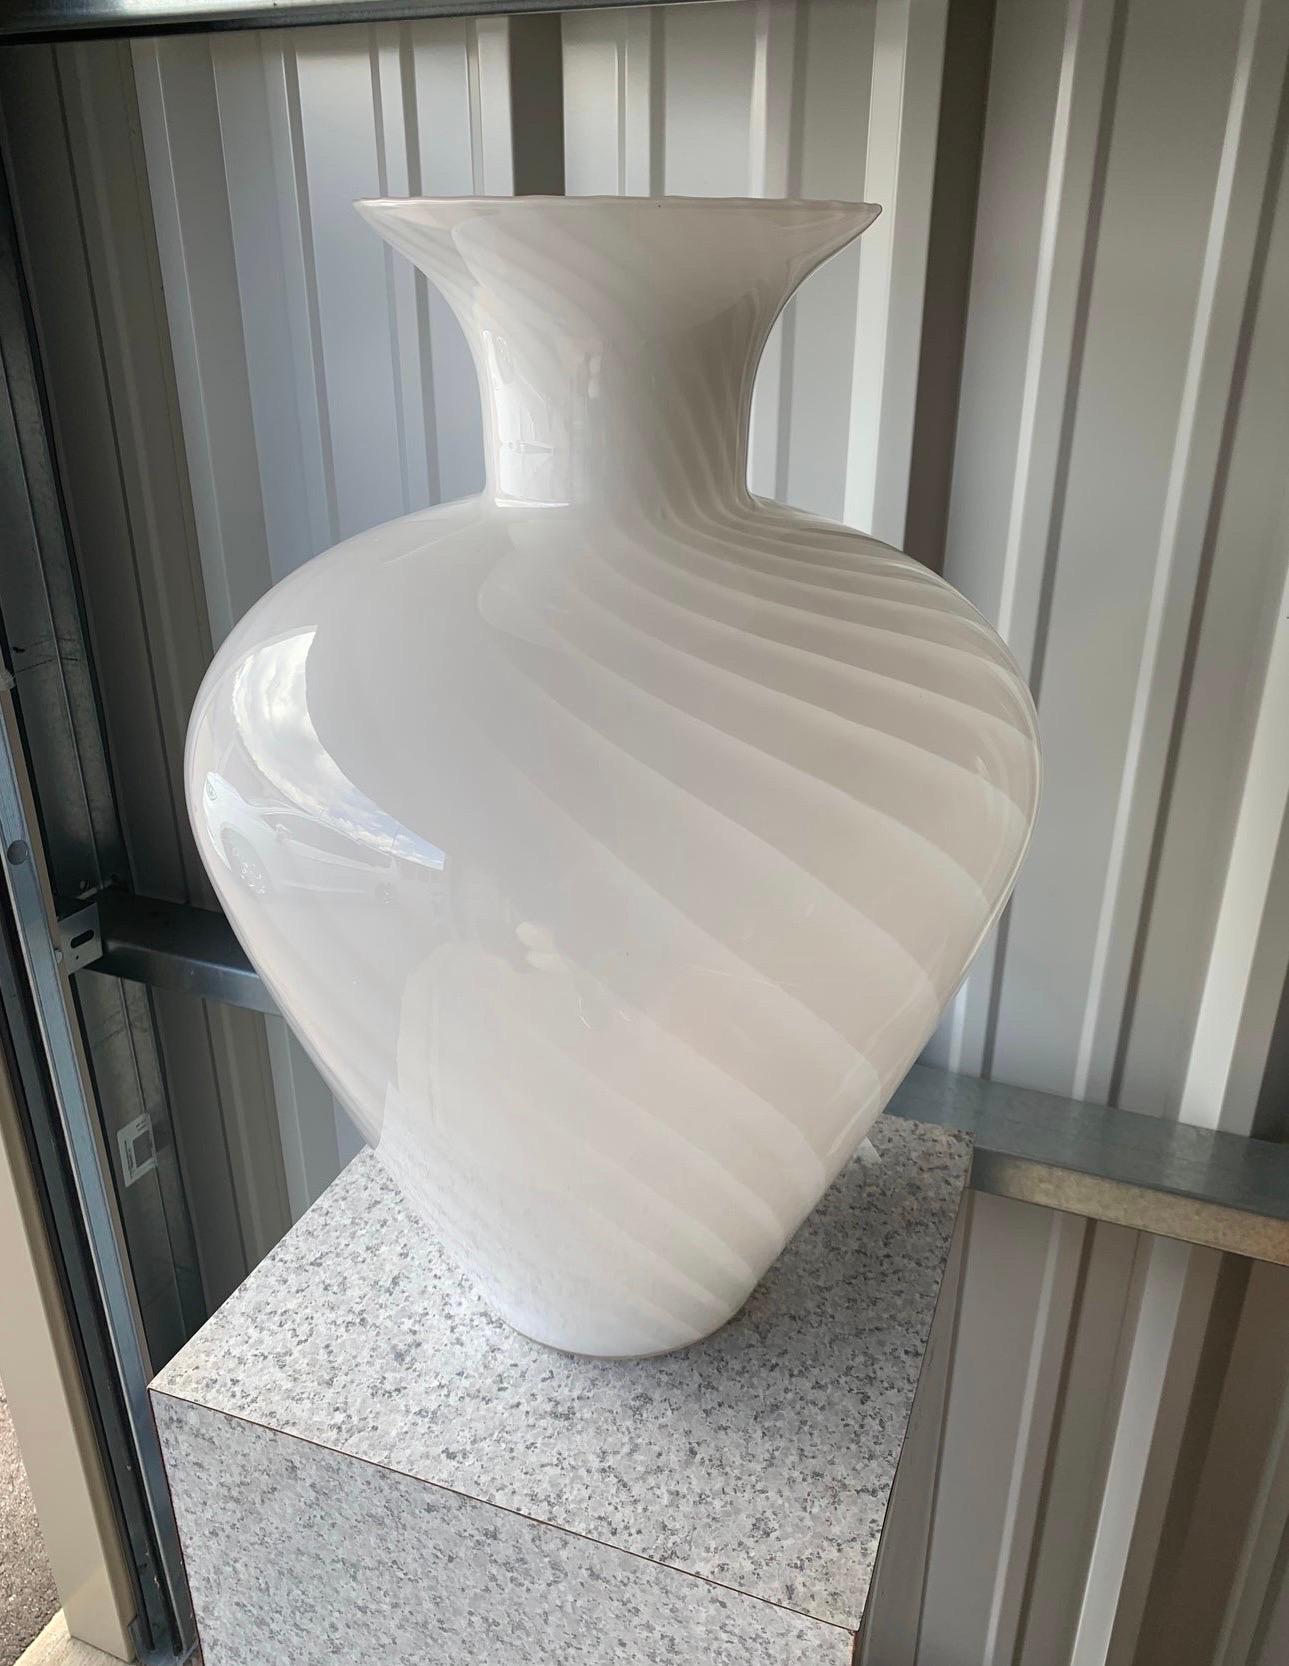 Vintage extra large Murano glass style hand blown vase! A beautiful white on frosted white monochromatic swirl pattern. It does have some bubbles here and there and the rounded rib at the top is not perfectly smooth. This adds to its handmade